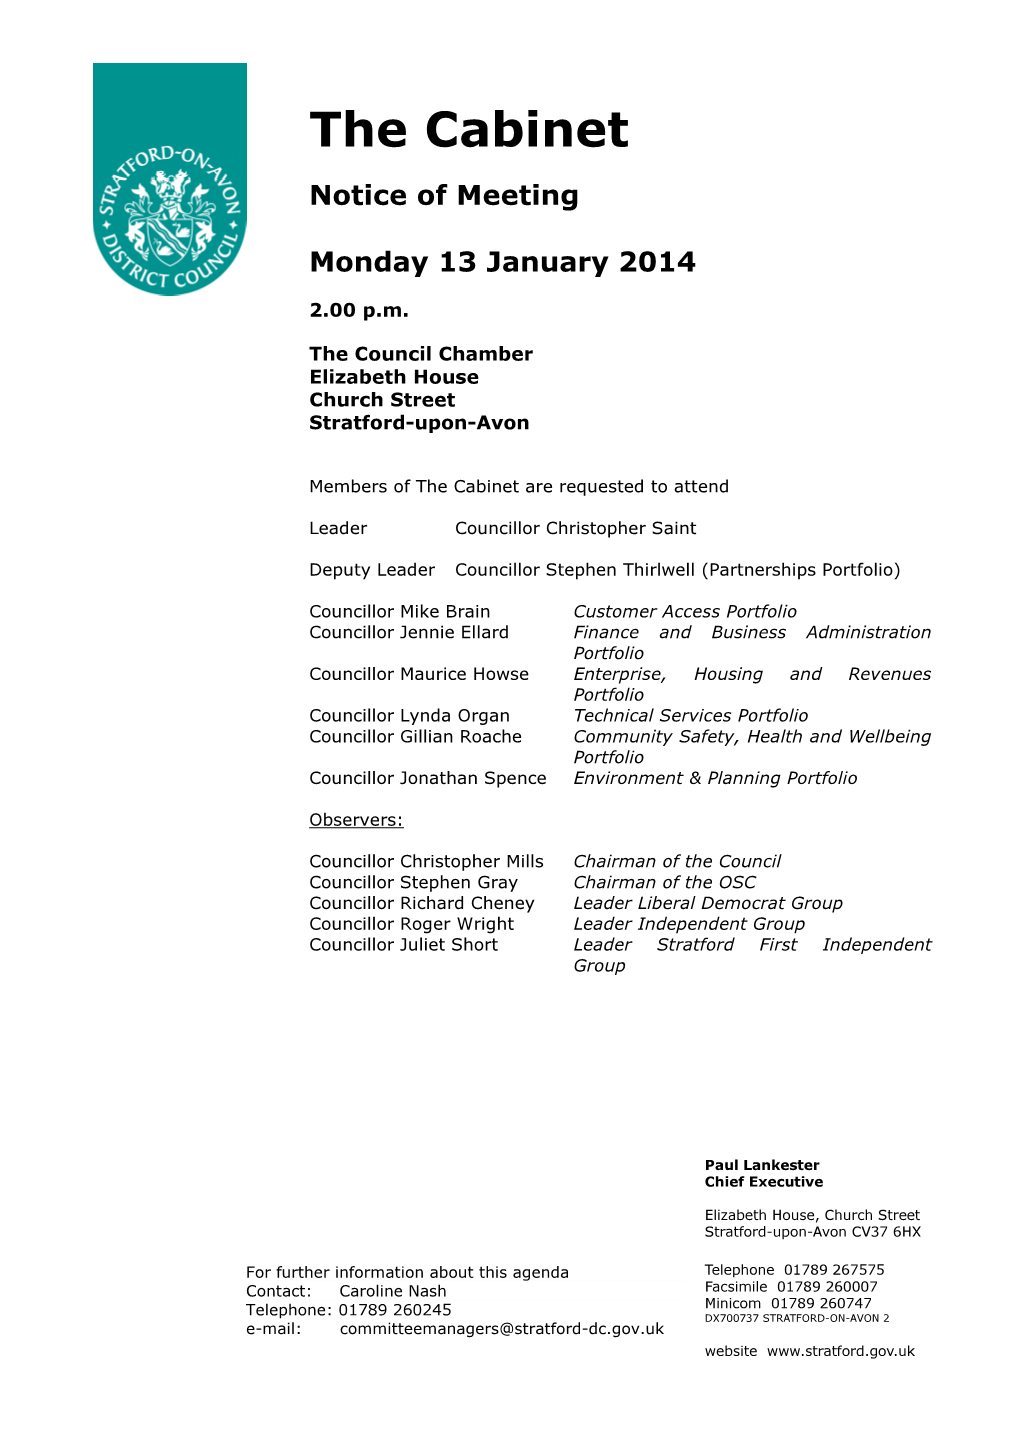 (Public Pack)Agenda Document for the Cabinet, 13/01/2014 14:00